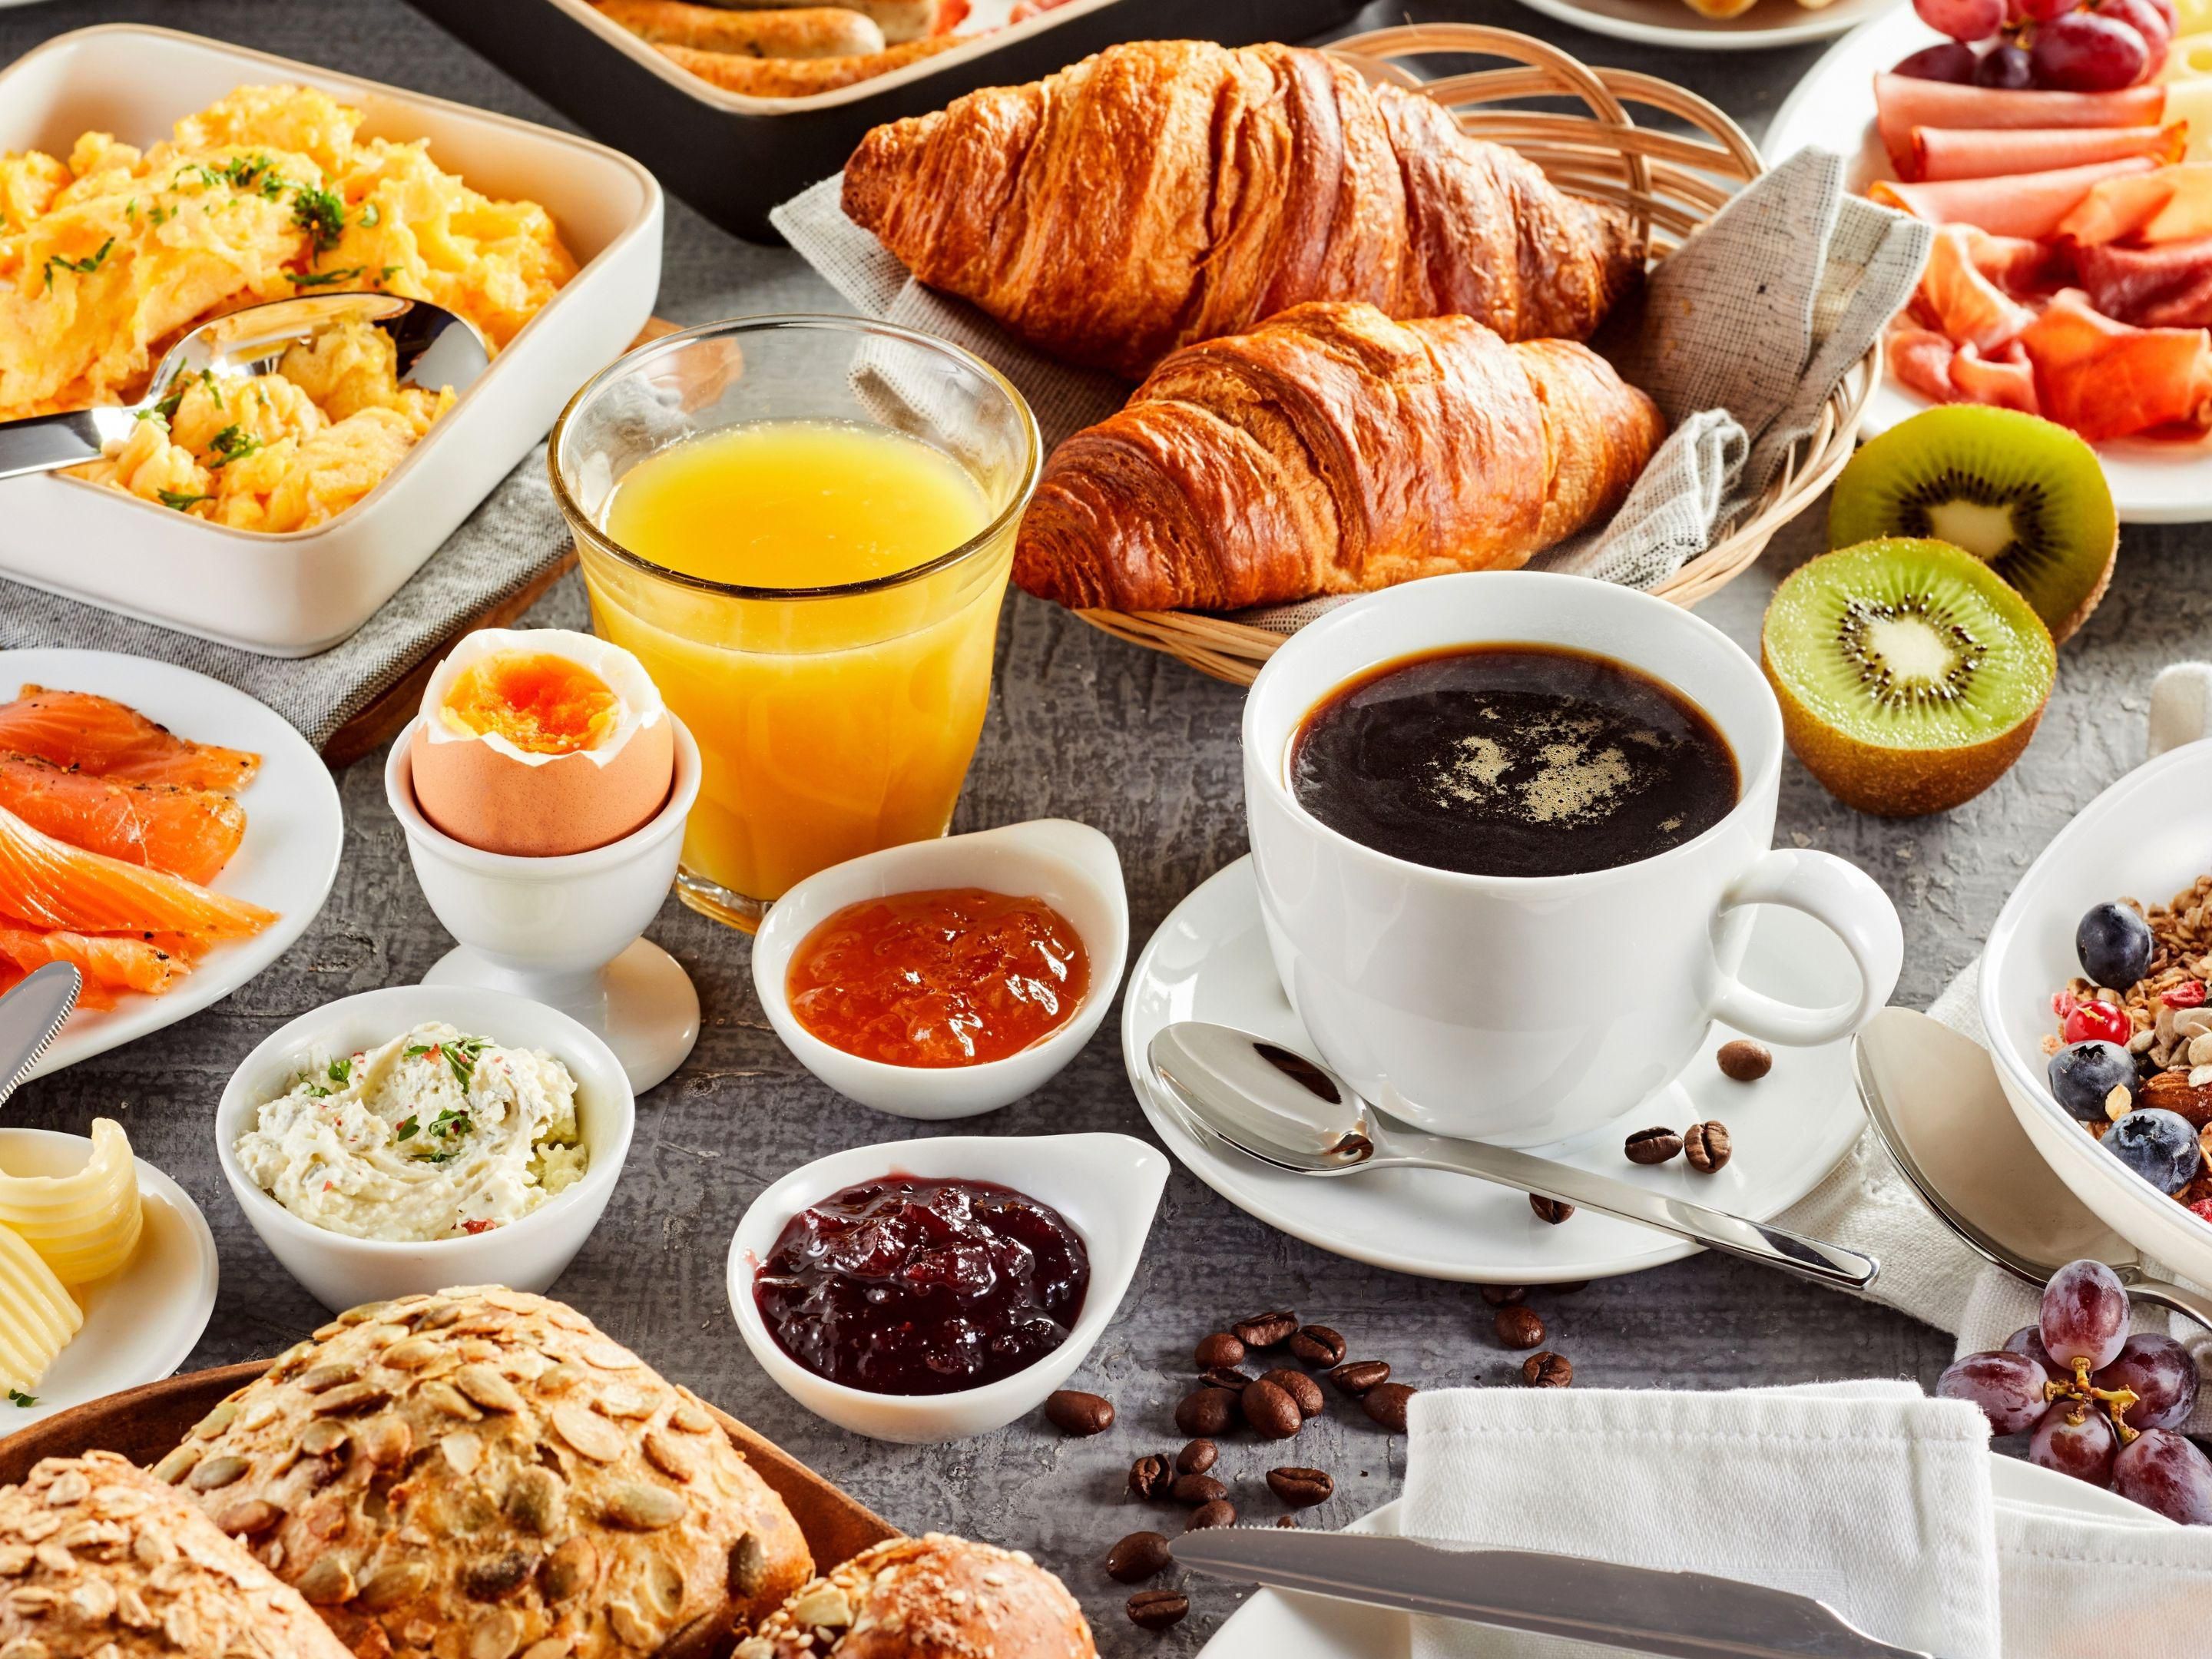 Start your day off right with a stop at the Silk Road Restaurant featuring a scrumptious international breakfast buffet offering.